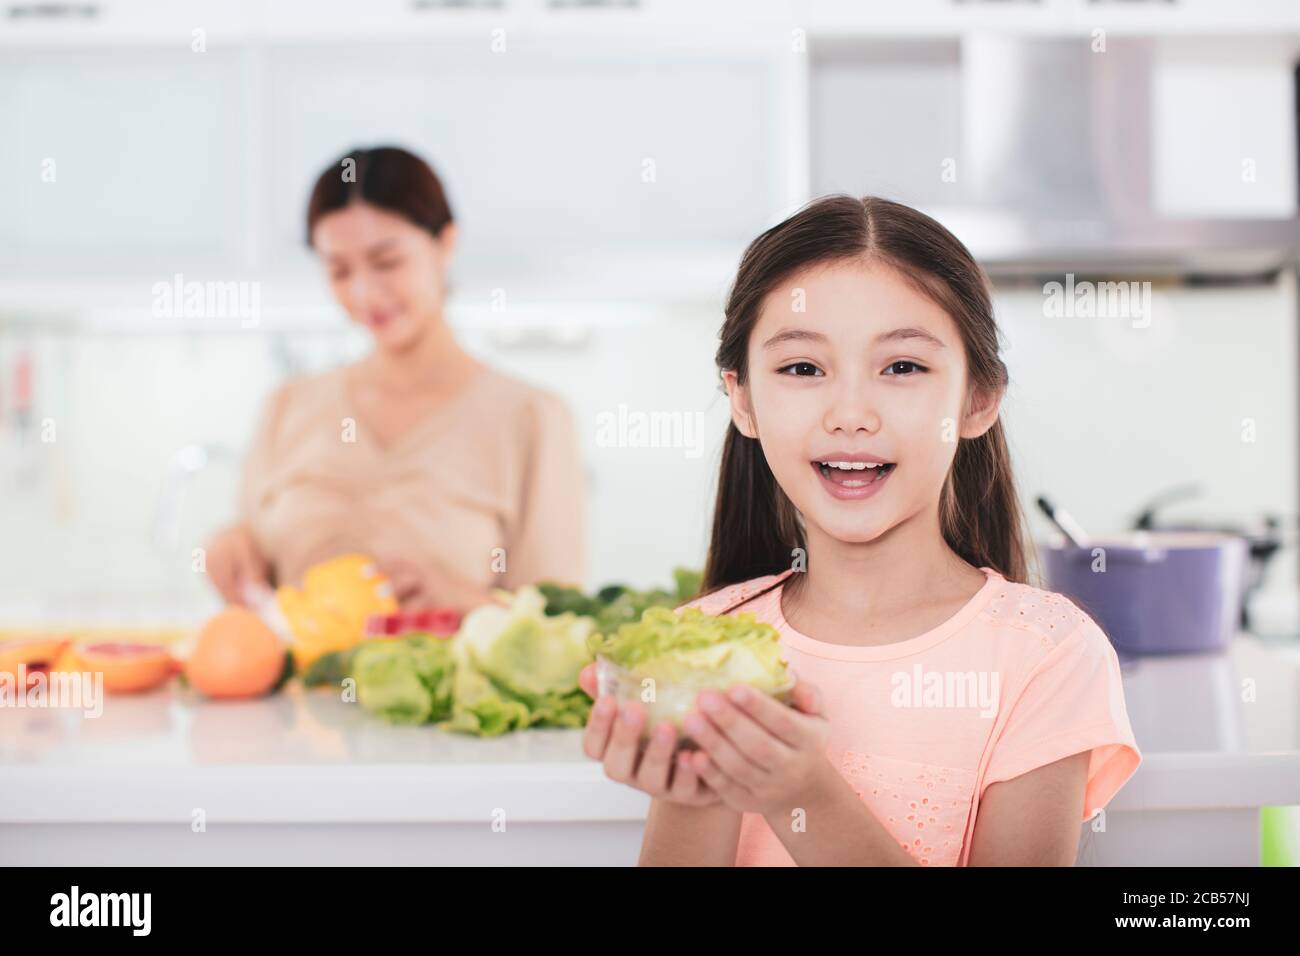 mother working at kitchen and daughter showing health food Stock Photo